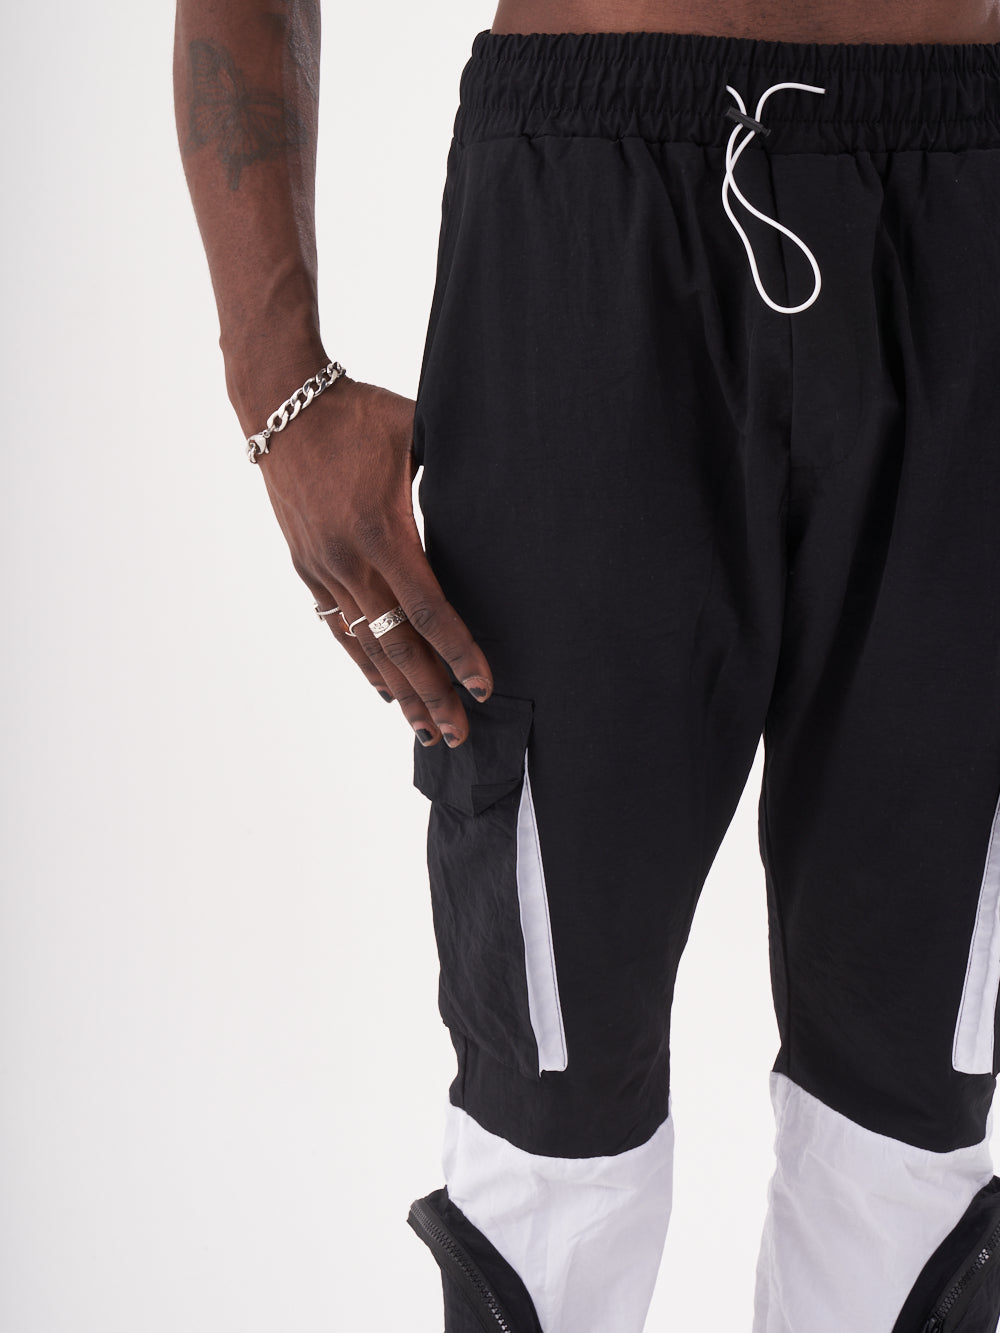 A man wearing RENEGADE | BLACK cargo pants with cargo pockets.